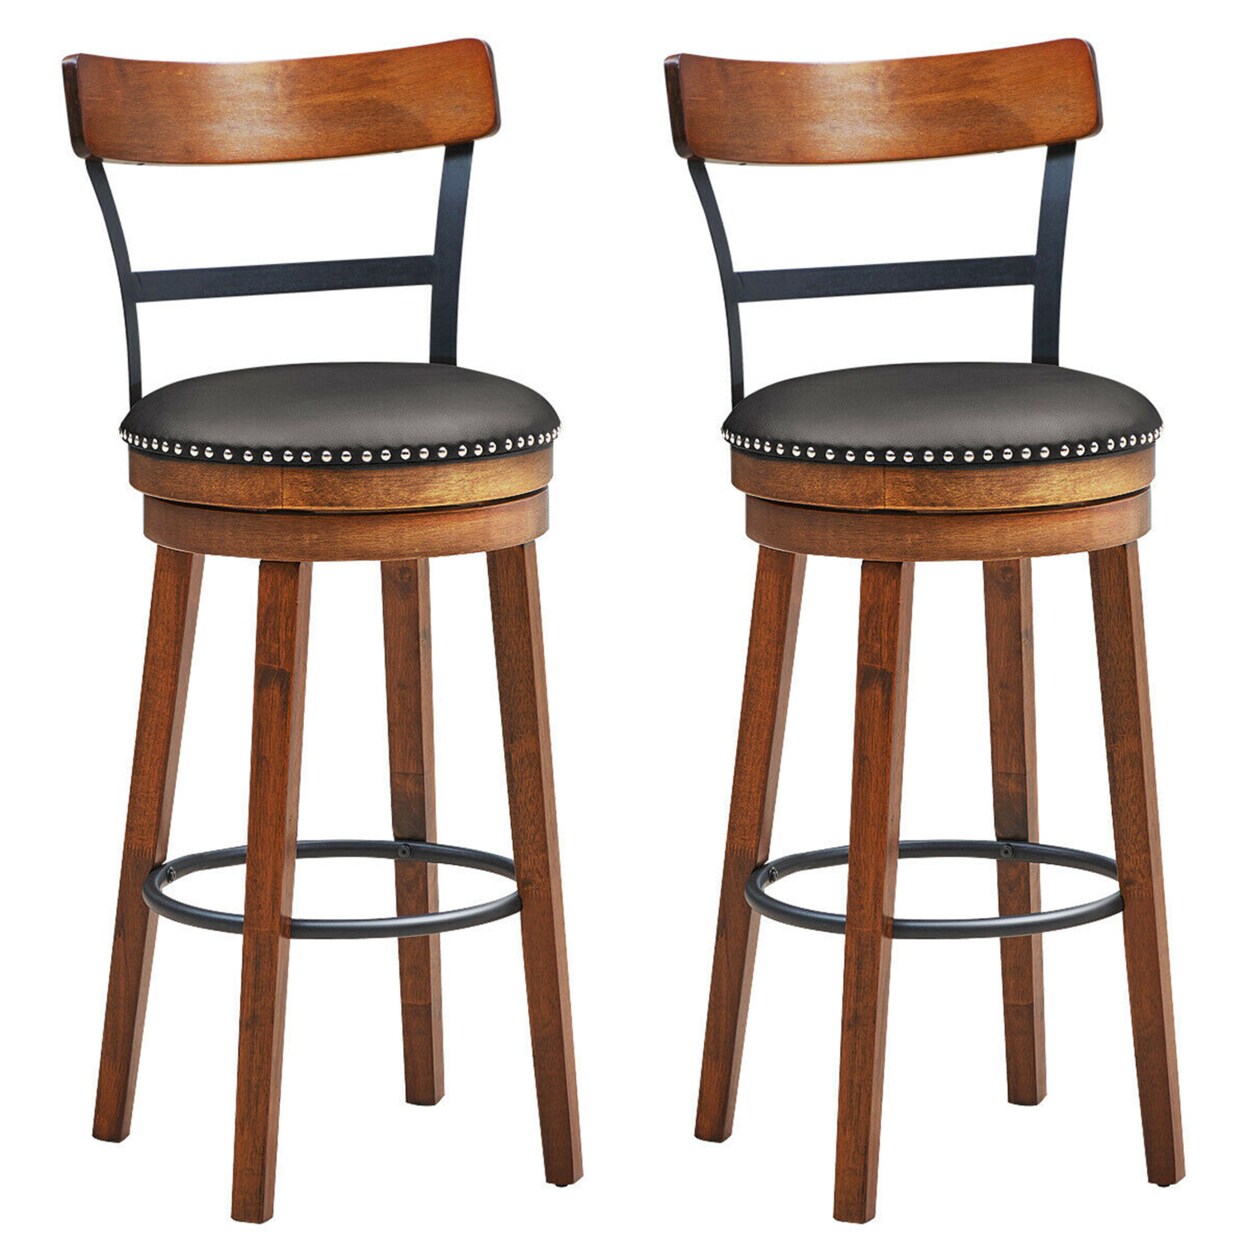 Gymax Set of 2 BarStool 30.5 Swivel Pub Height Dining Chair with Rubber Wood Legs